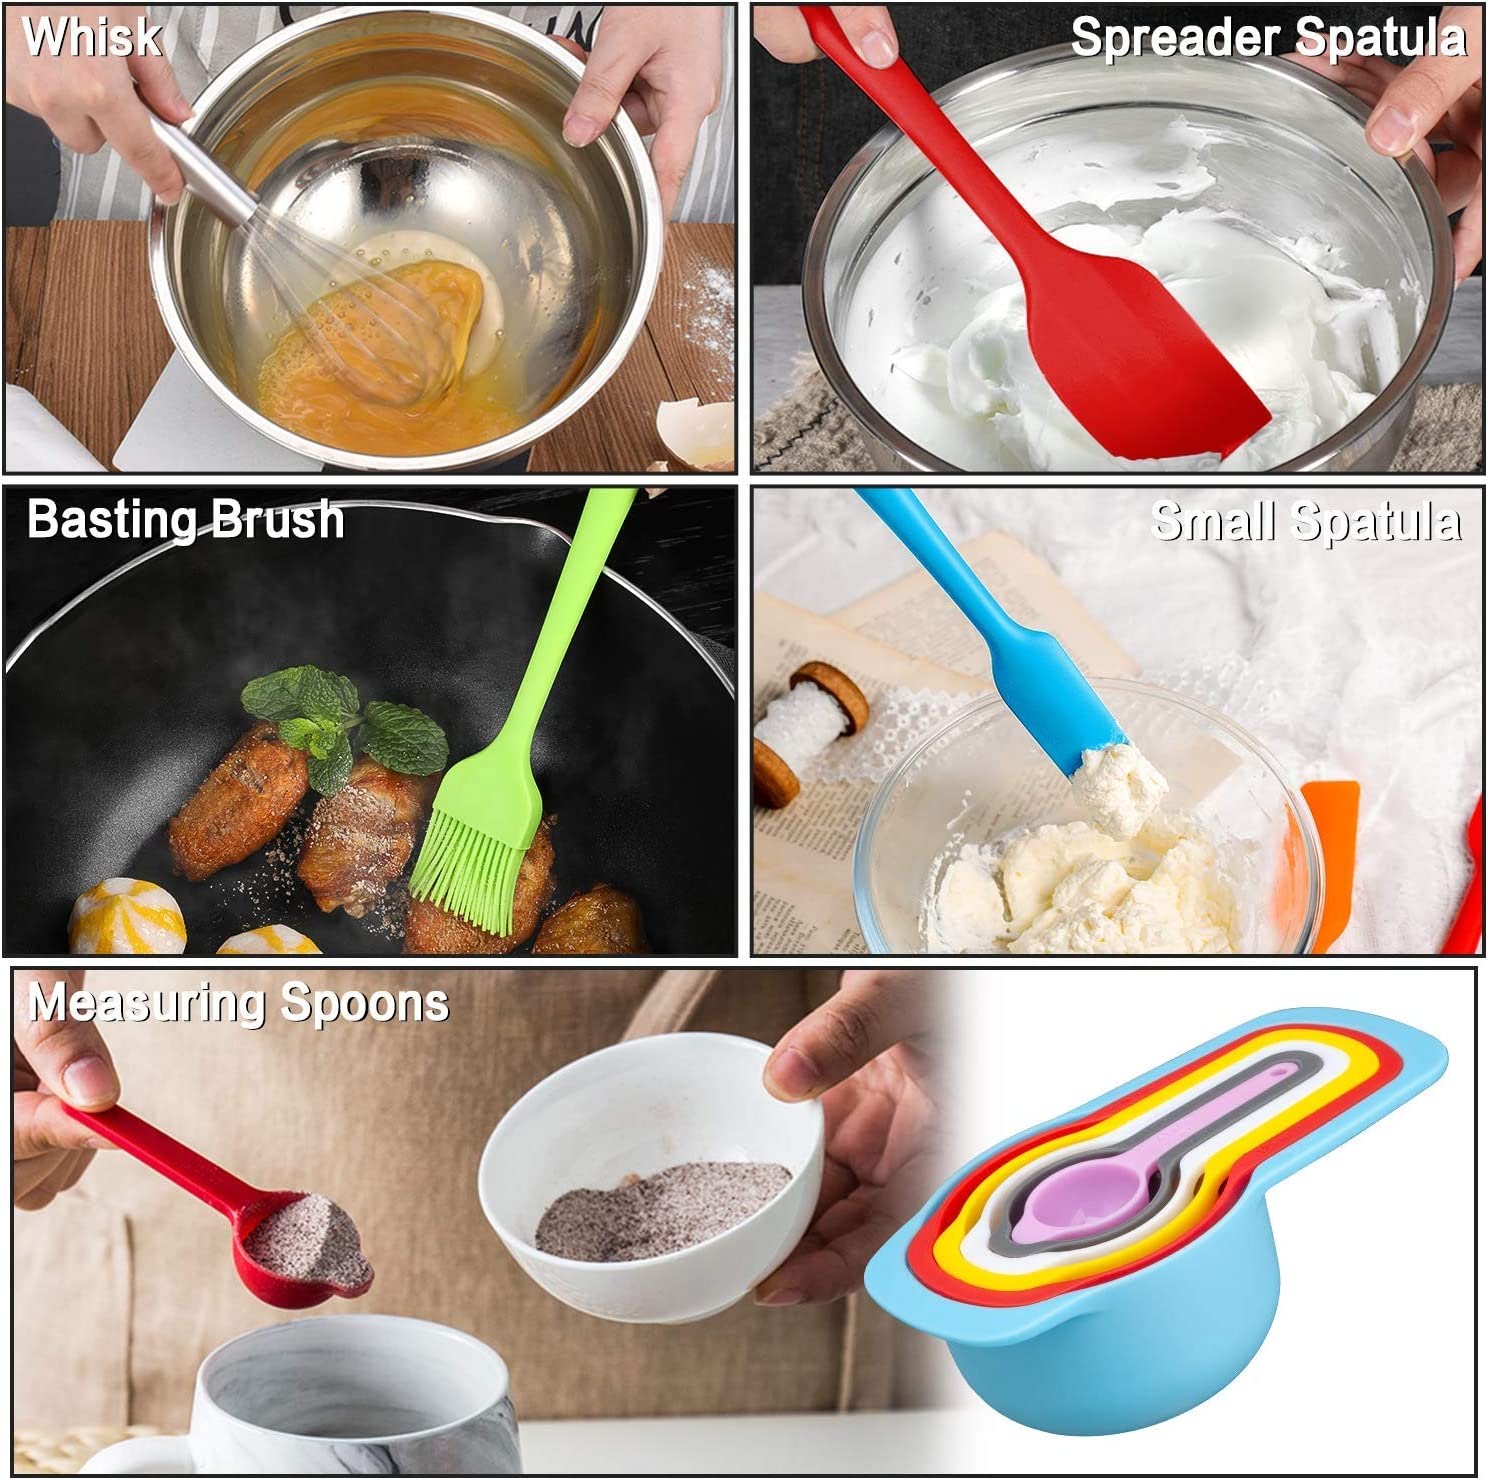 Stainless Steel Measuring Spoons Stackable - 6 pcs with FREE Flexible Mini  Silicone Measuring Cup 